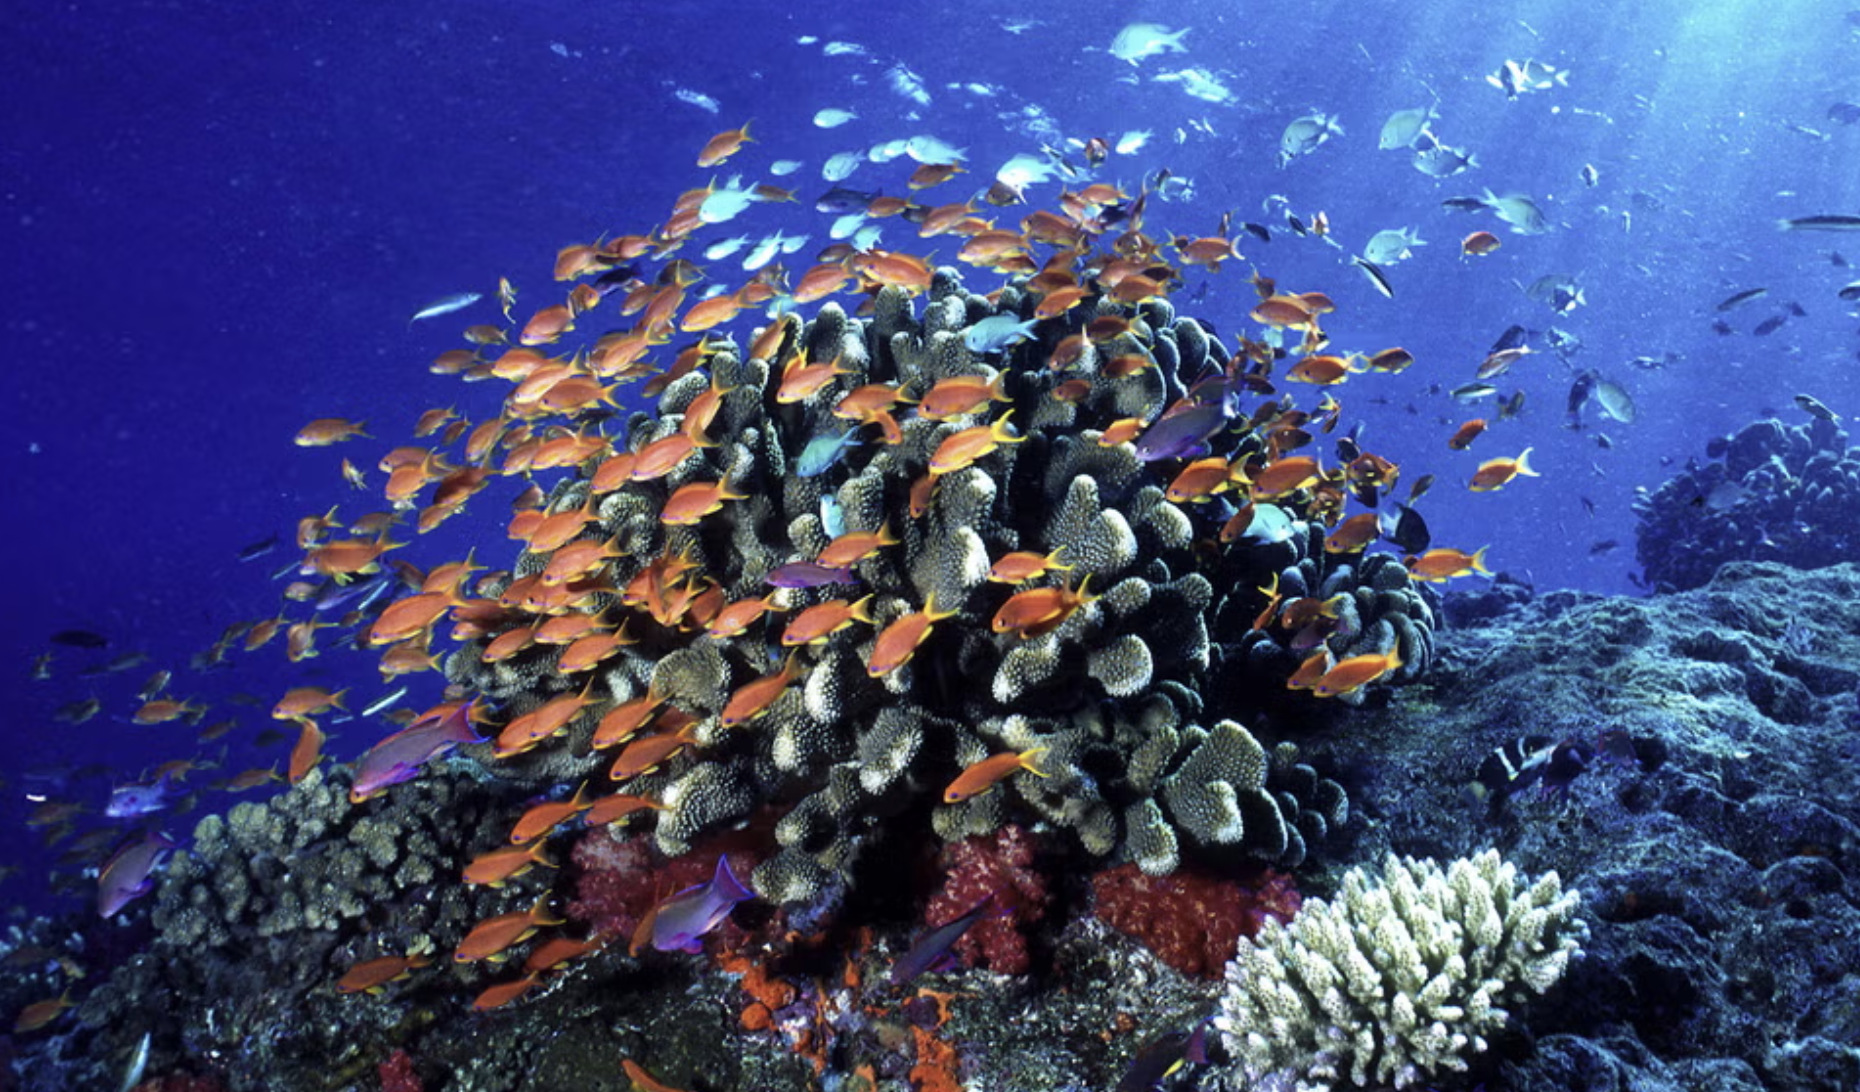 50 countries pledge to protect at least 30% of world’s land and oceans by 2030